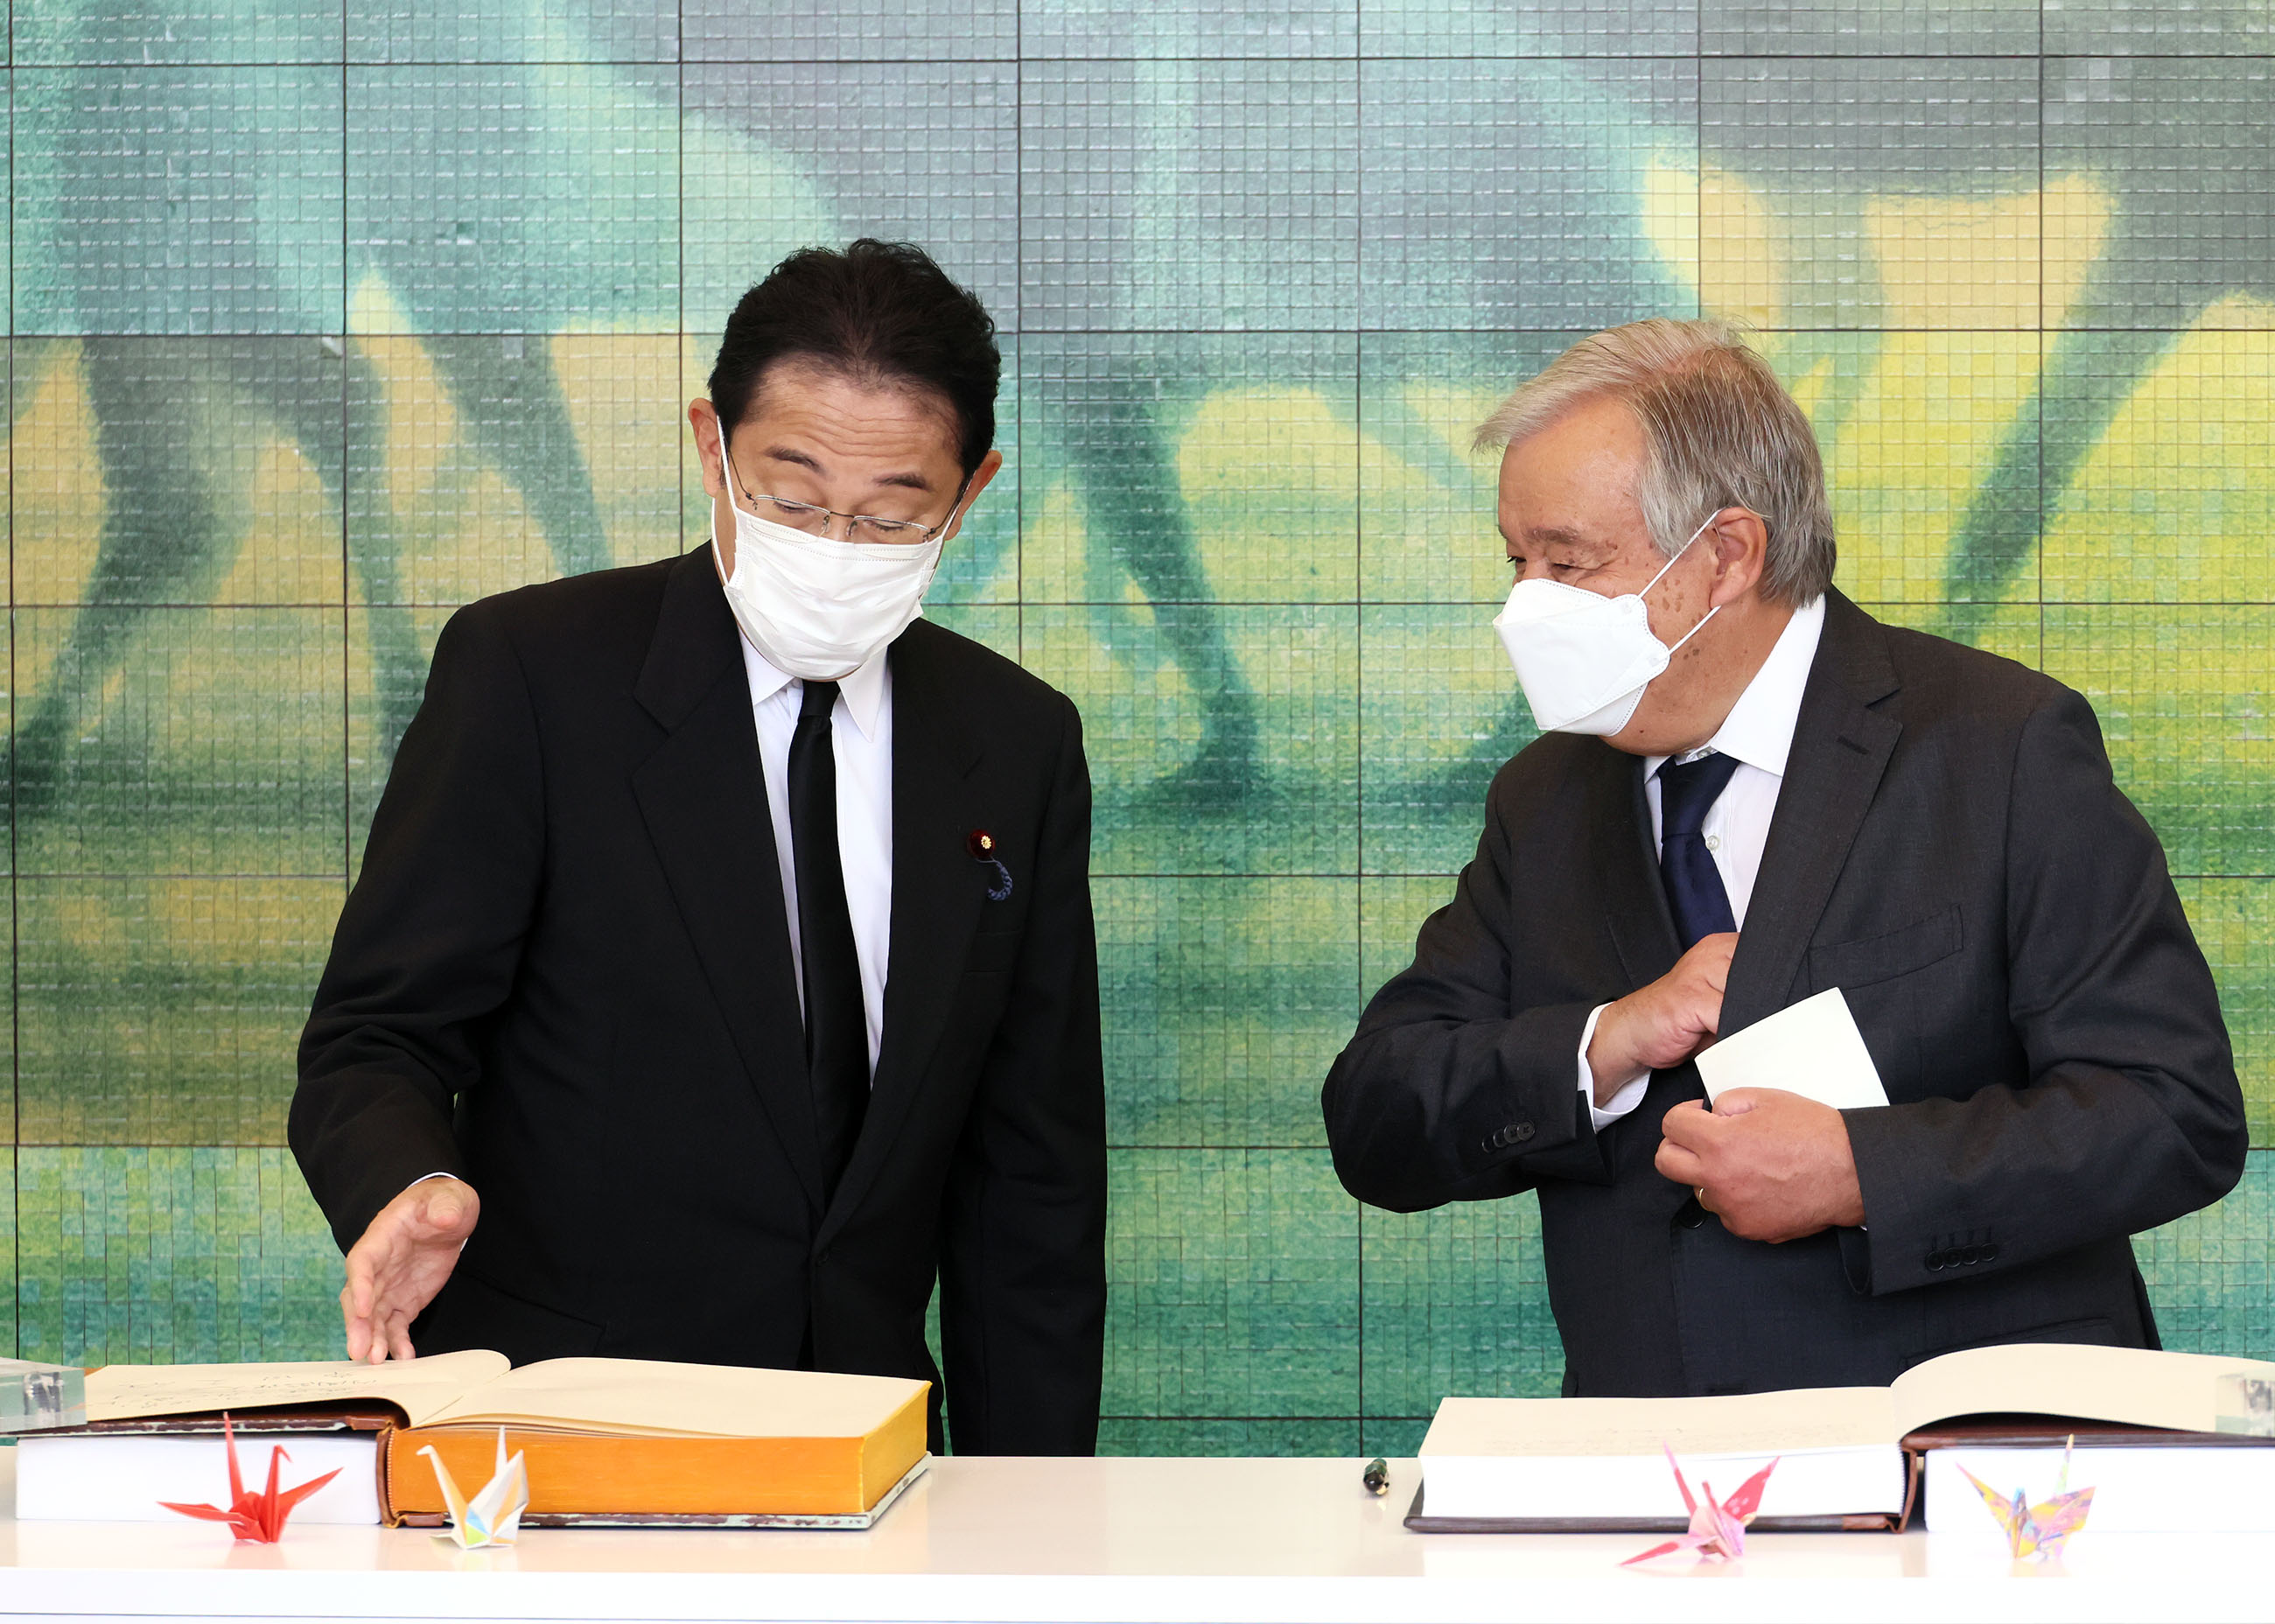 Photograph of the Prime Minister and UN Secretary-General Guterres signing a visitors’ book (2)